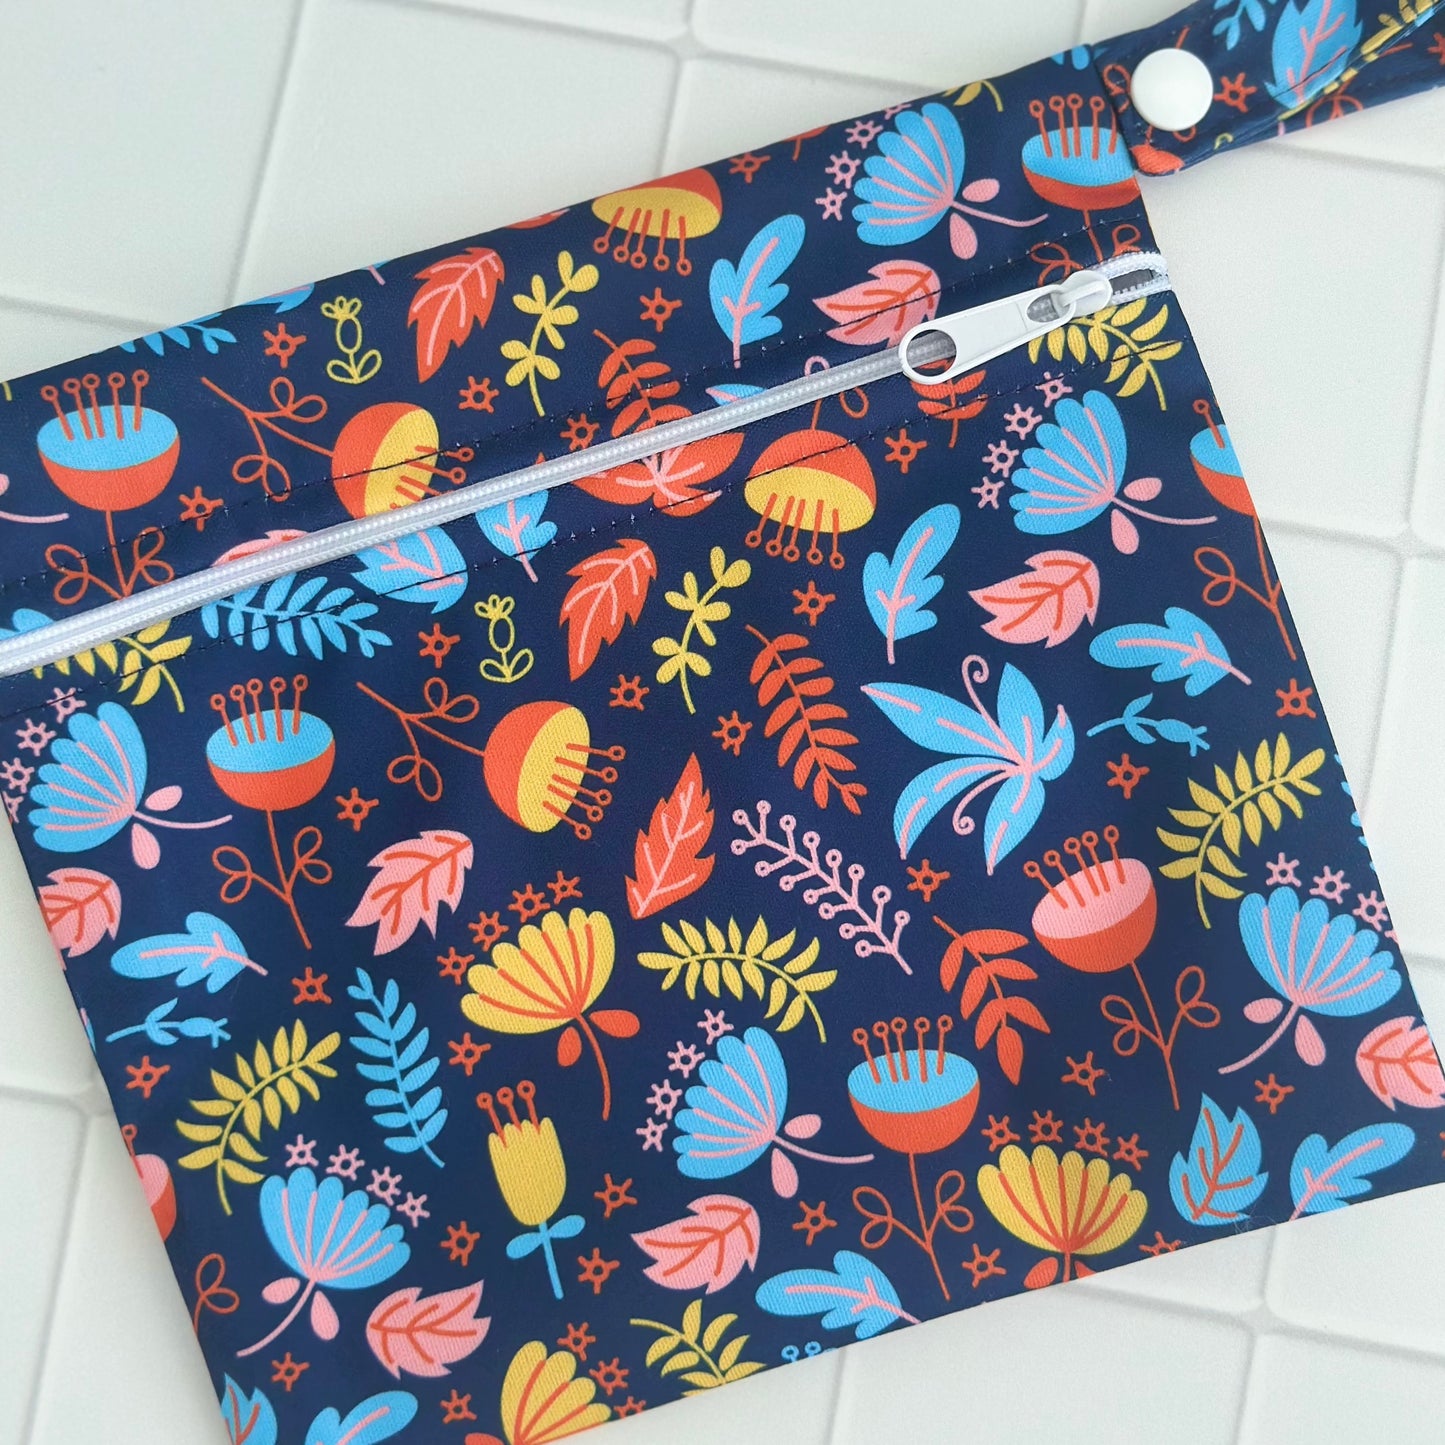 Waterproof Cosmetic Pouch Blue and Orange Floral